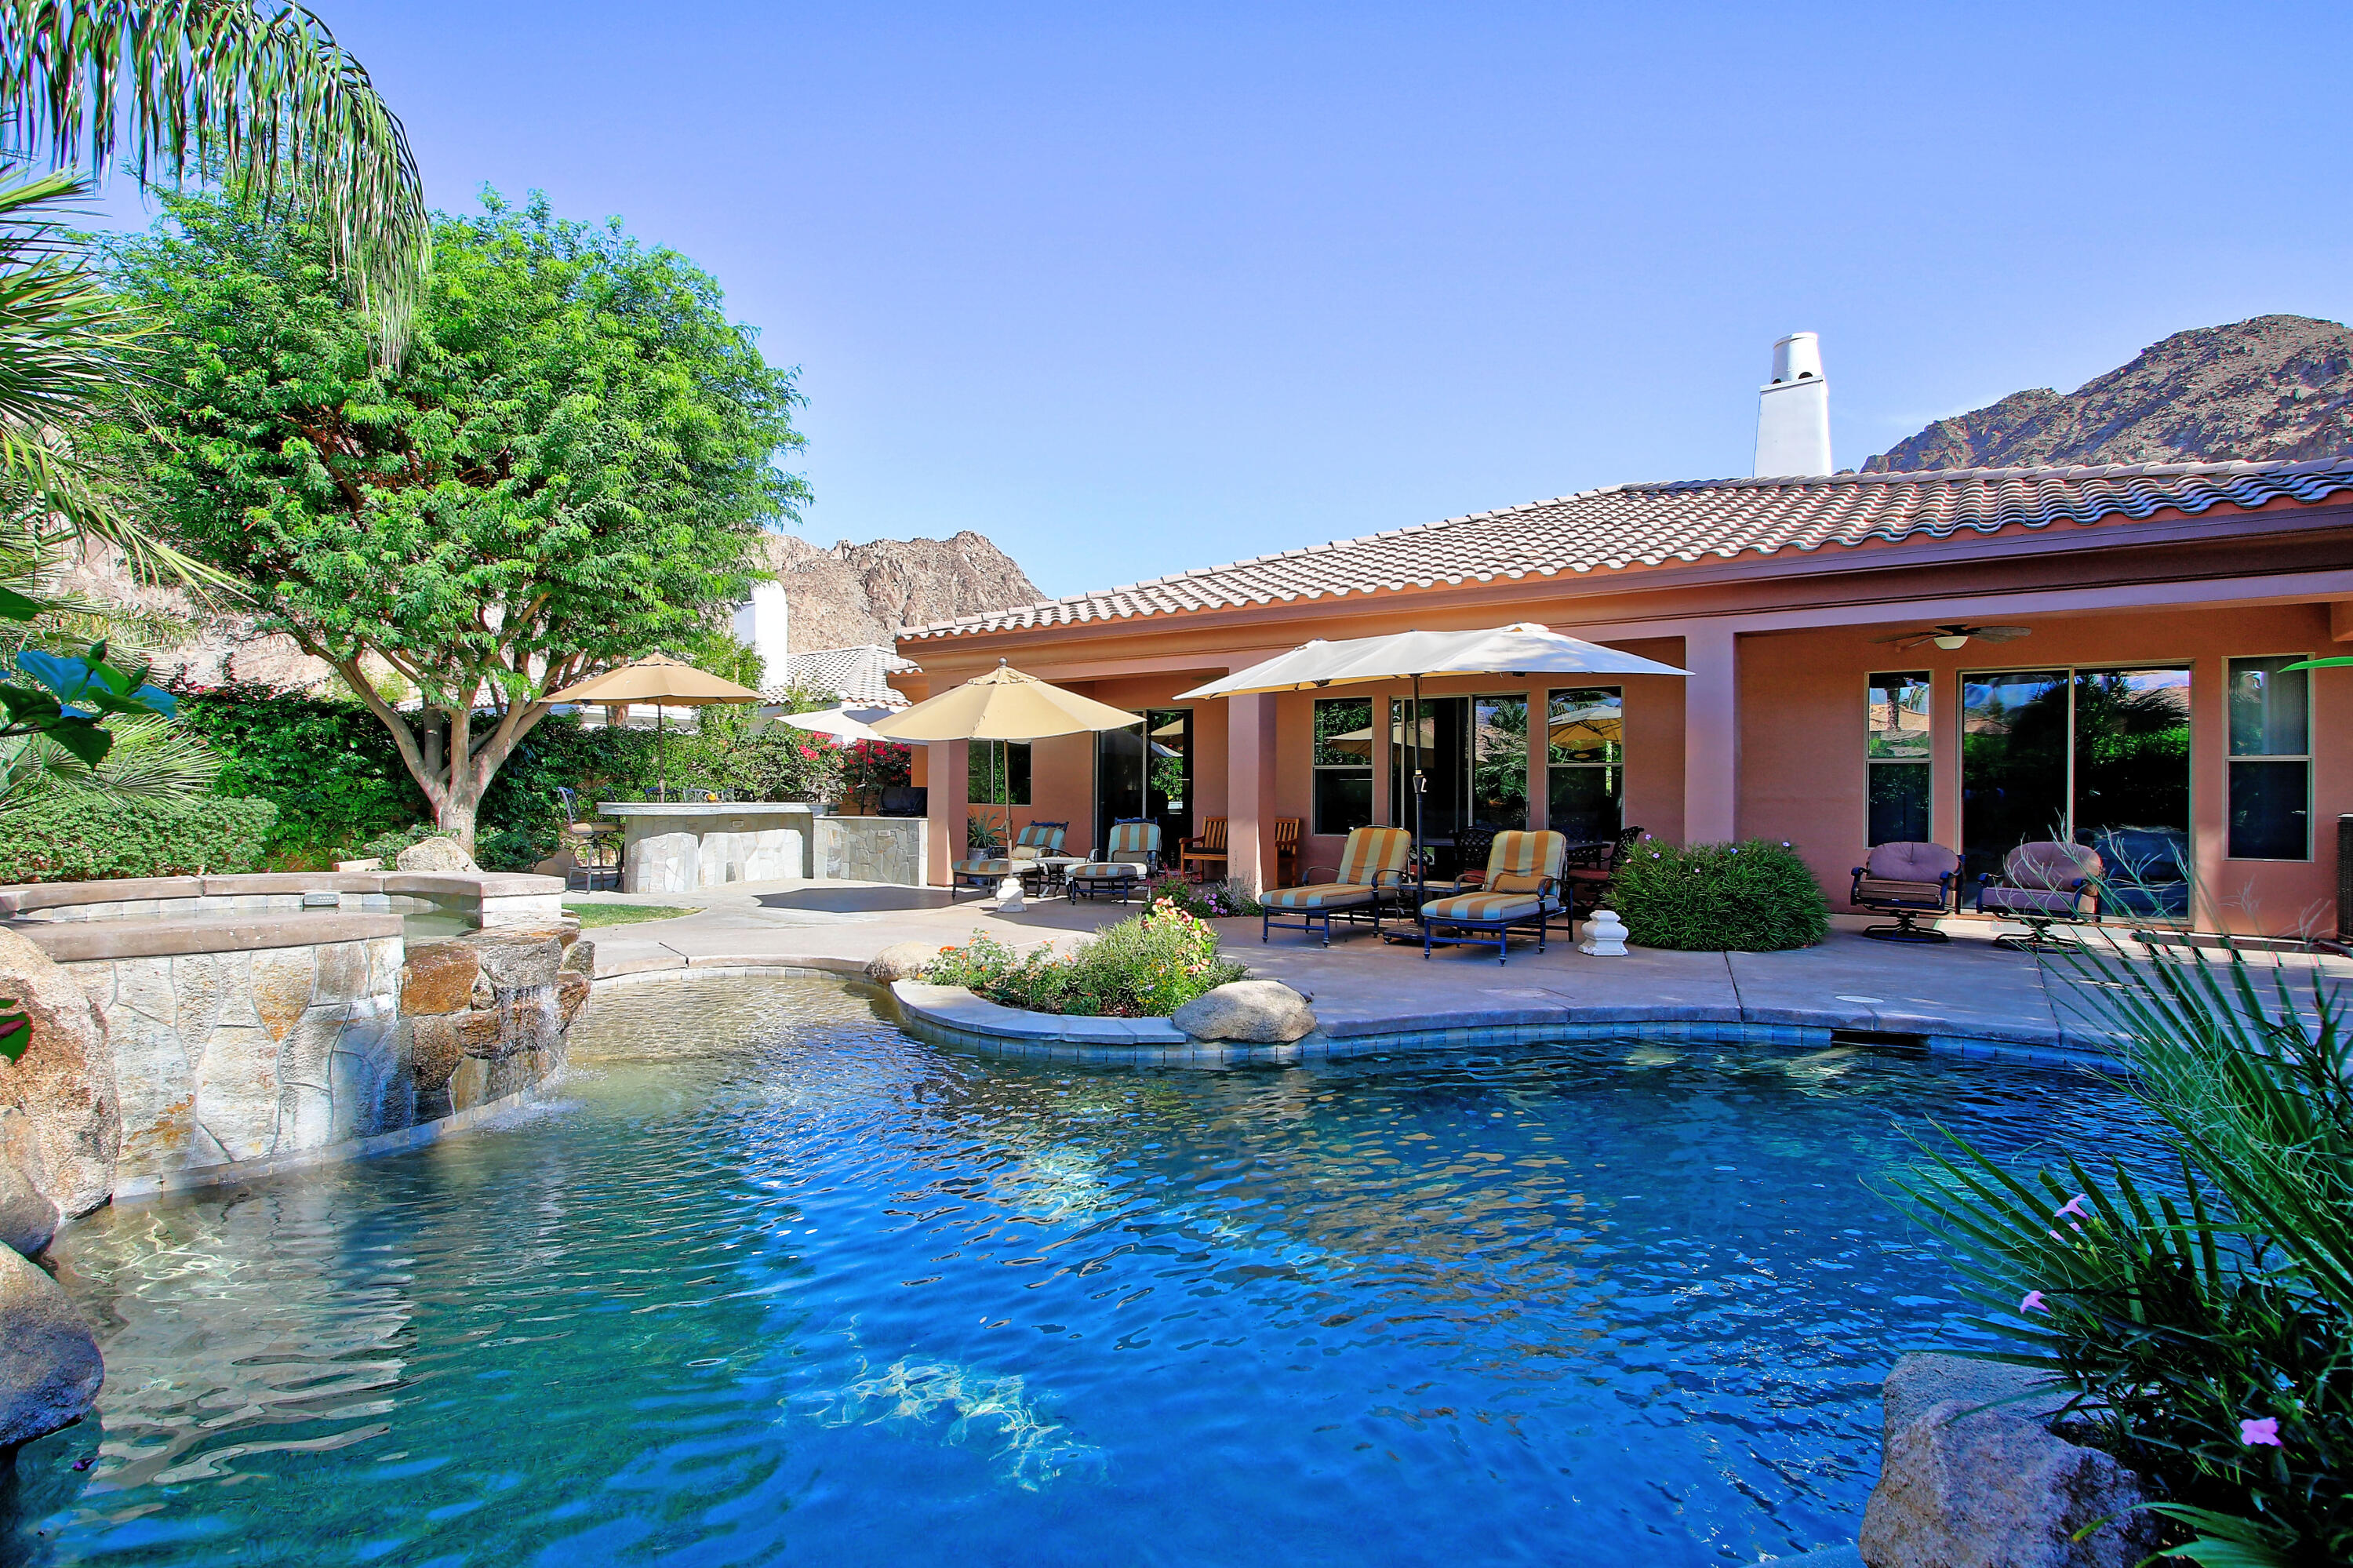 a view of a house with patio chairs and swimming pool